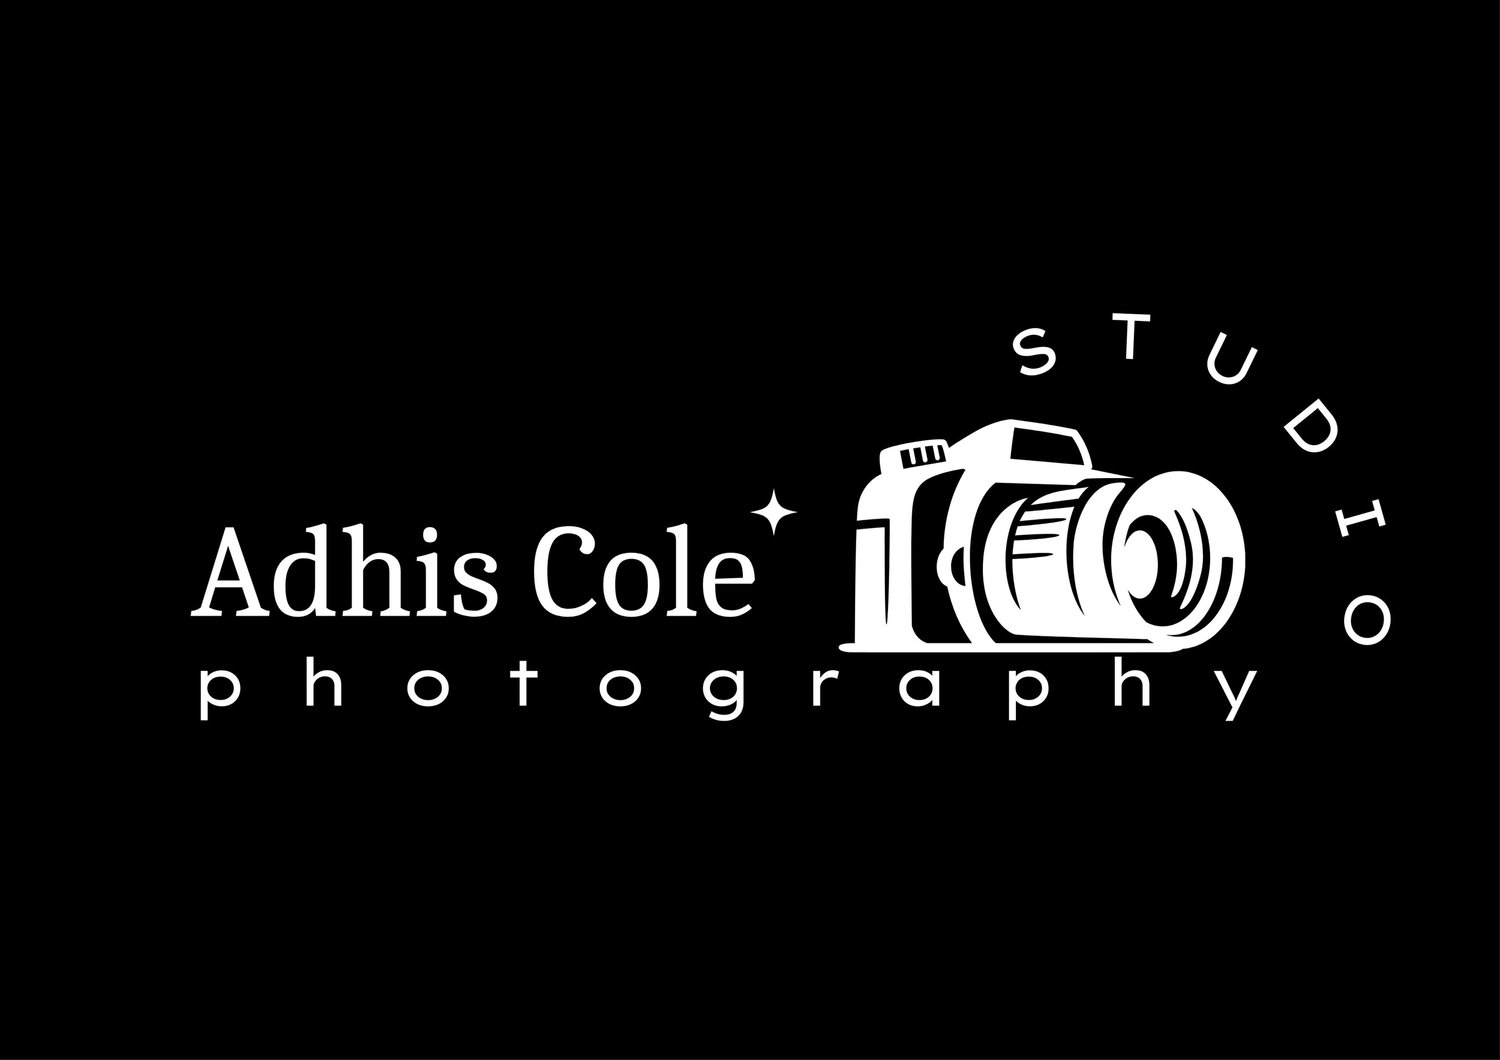 ADHIS COLE PHOTOGRAPHY